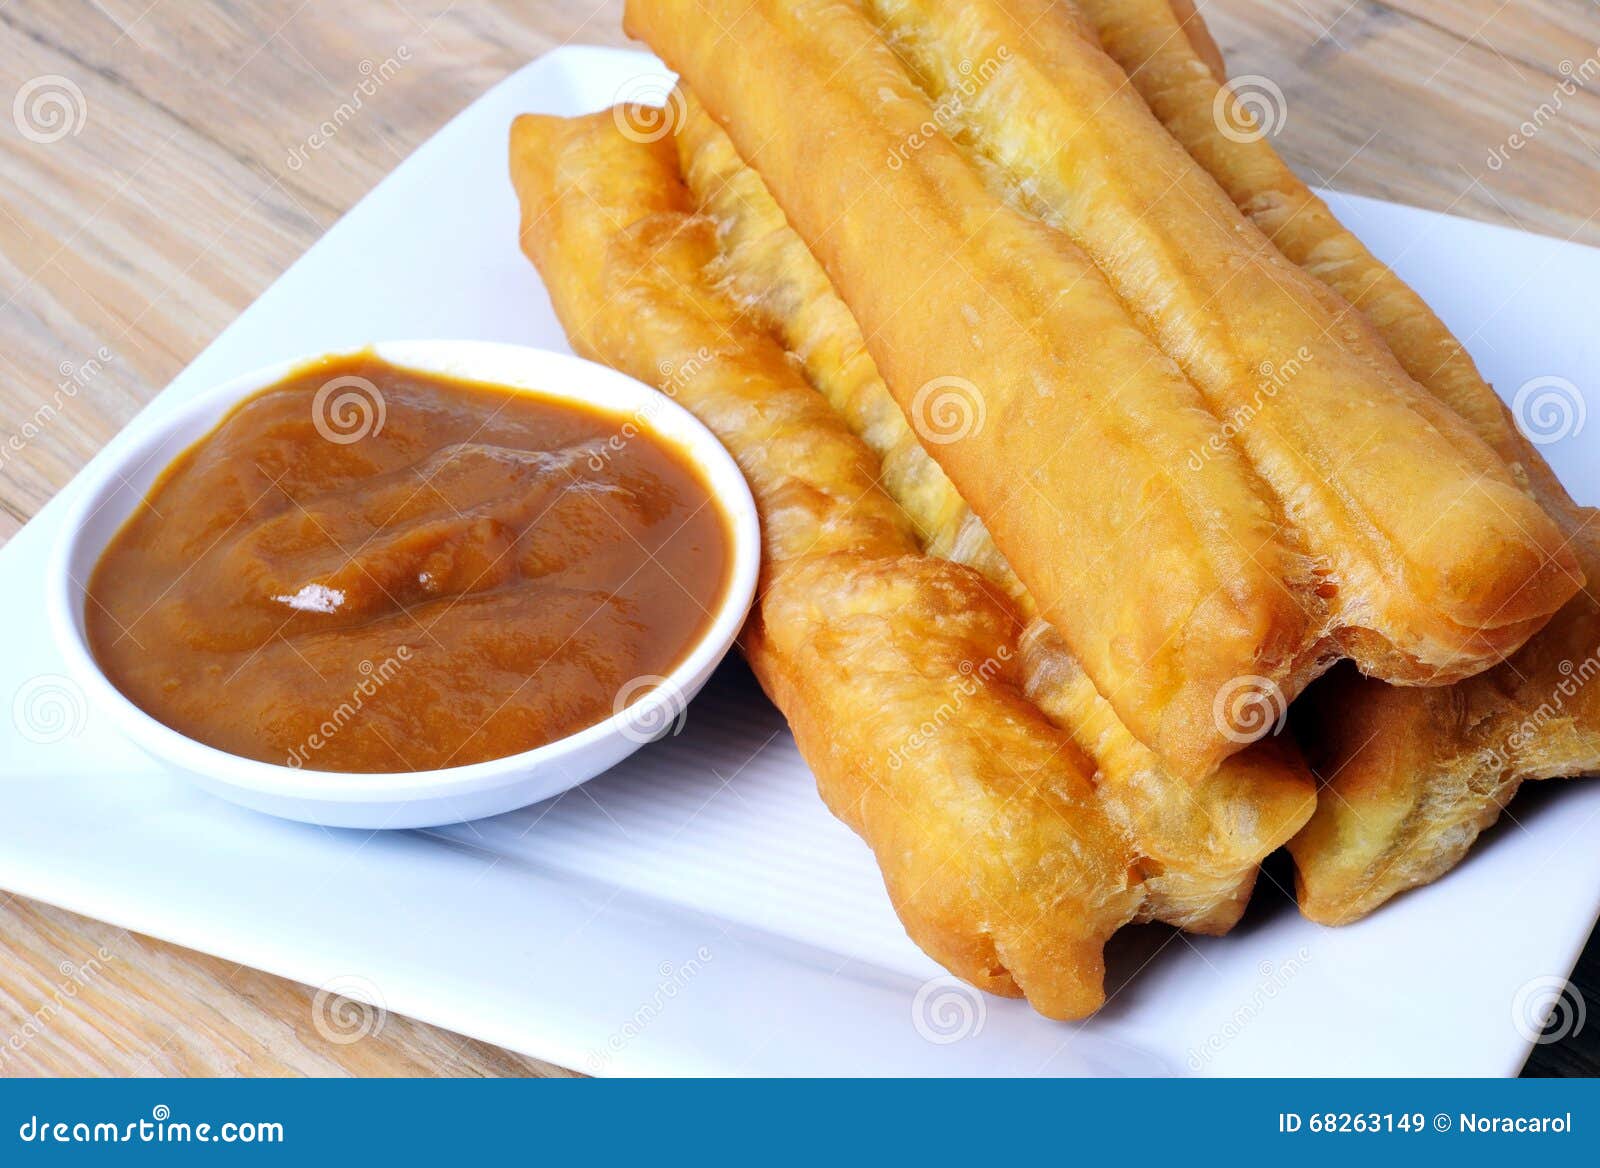 Youtiao Or Fried Bread Stick Stock Image - Image of 